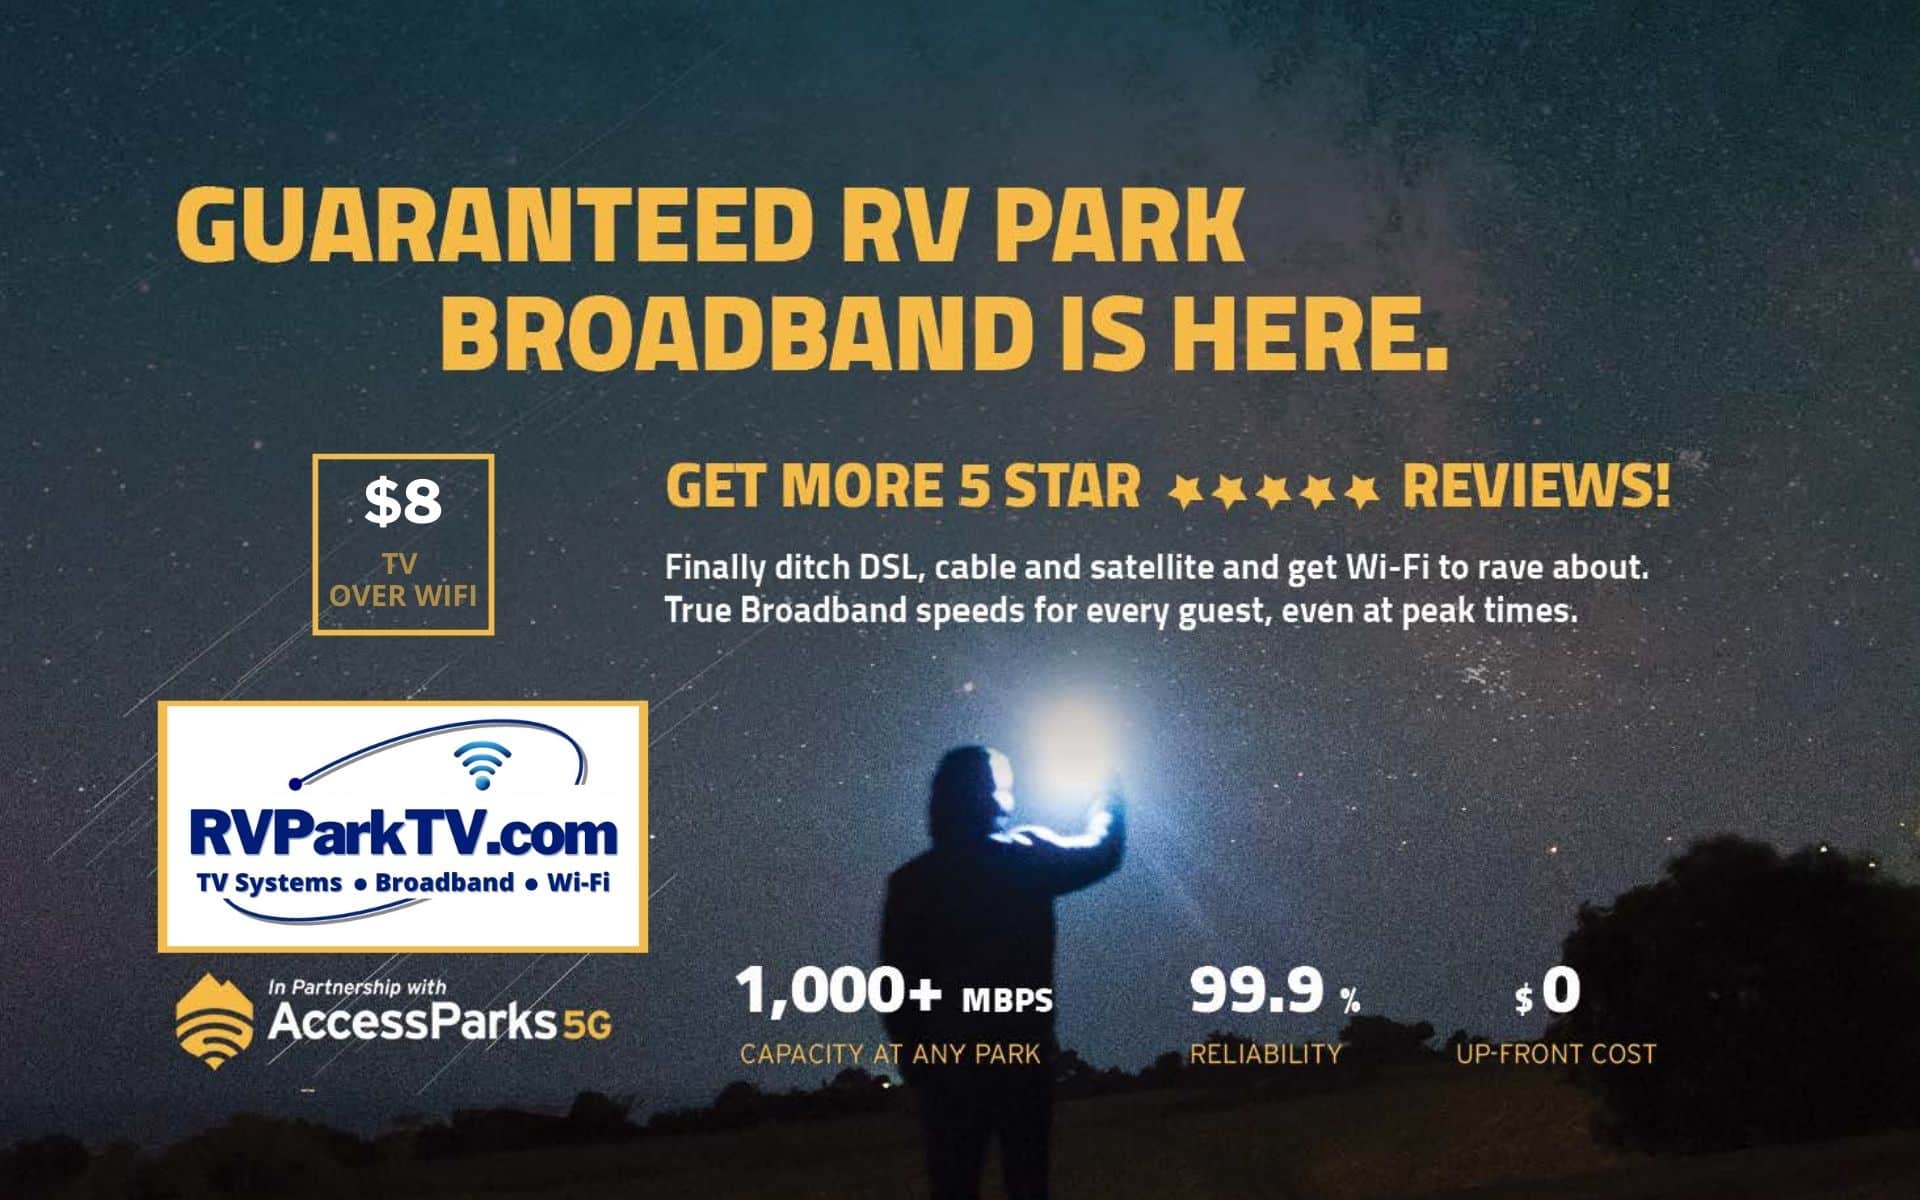 Guaranteed Speed Broadband Internet Access for RV Parks and Campgrounds from RVPARKTV.com